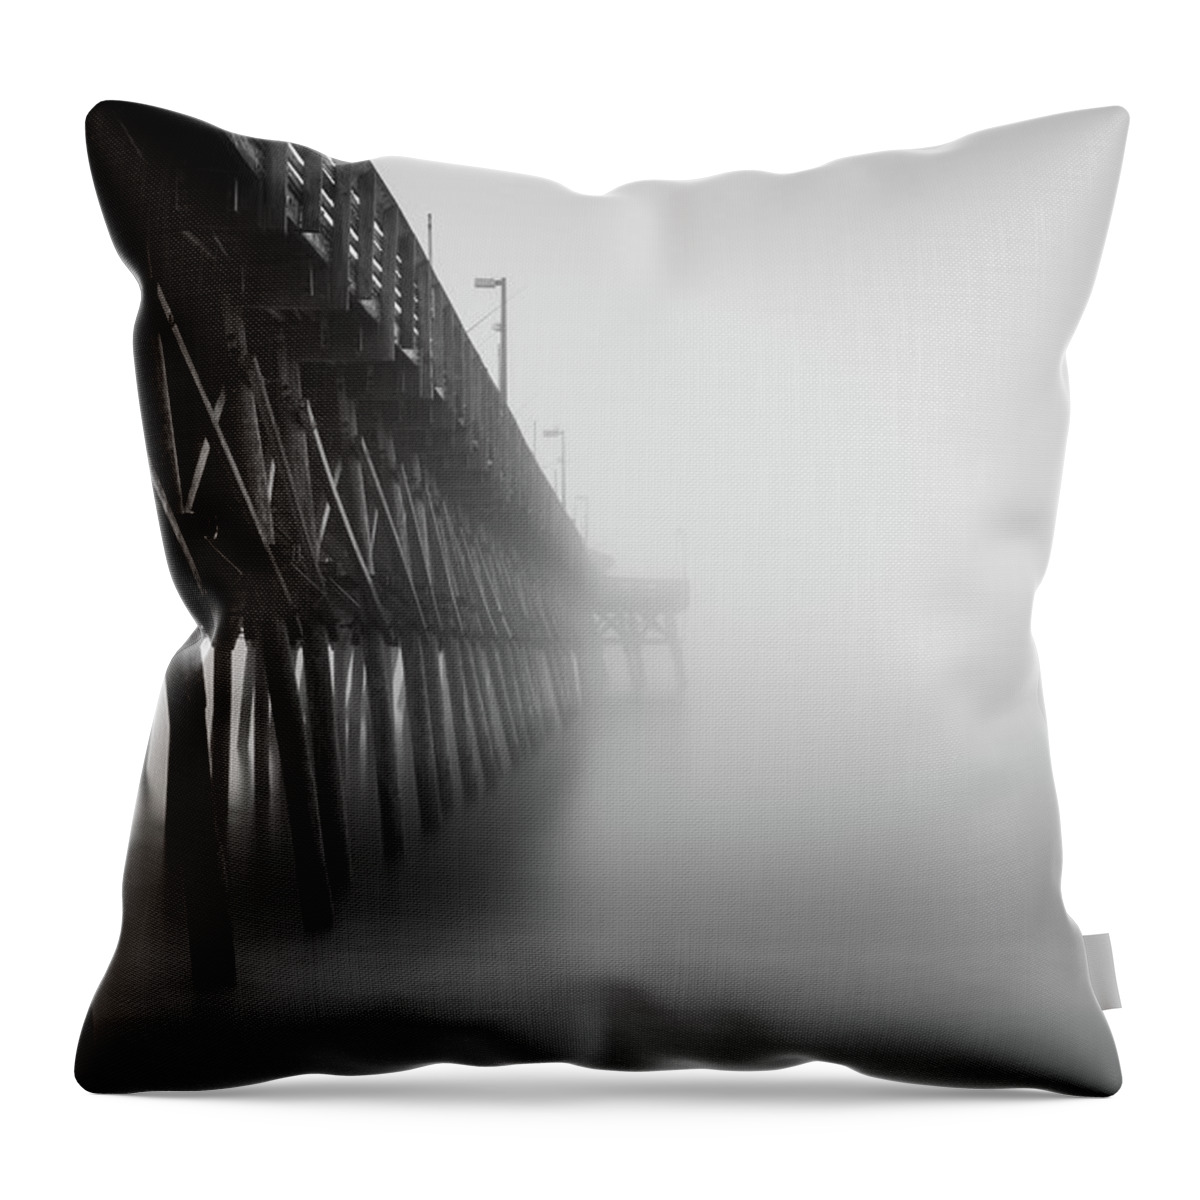 Garden City Throw Pillow featuring the photograph Misty November Morning II by Ivo Kerssemakers